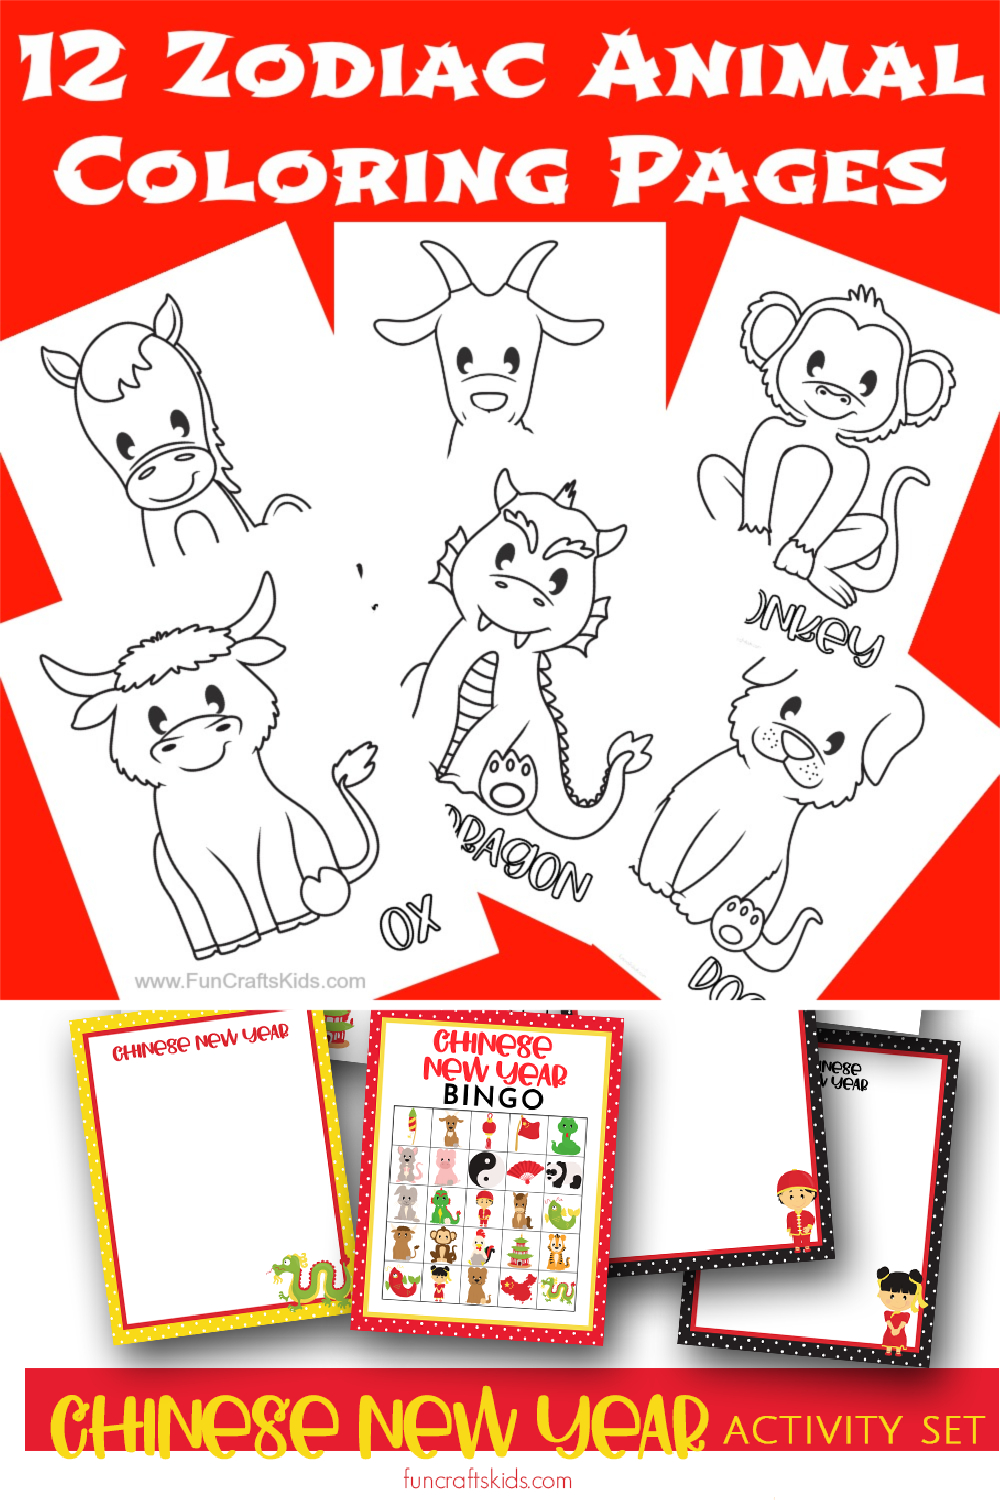 12 Free Printable Chinese Zodiac Coloring Pages - Fun Crafts Kids - Free Printable Chinese Zodiac Signs